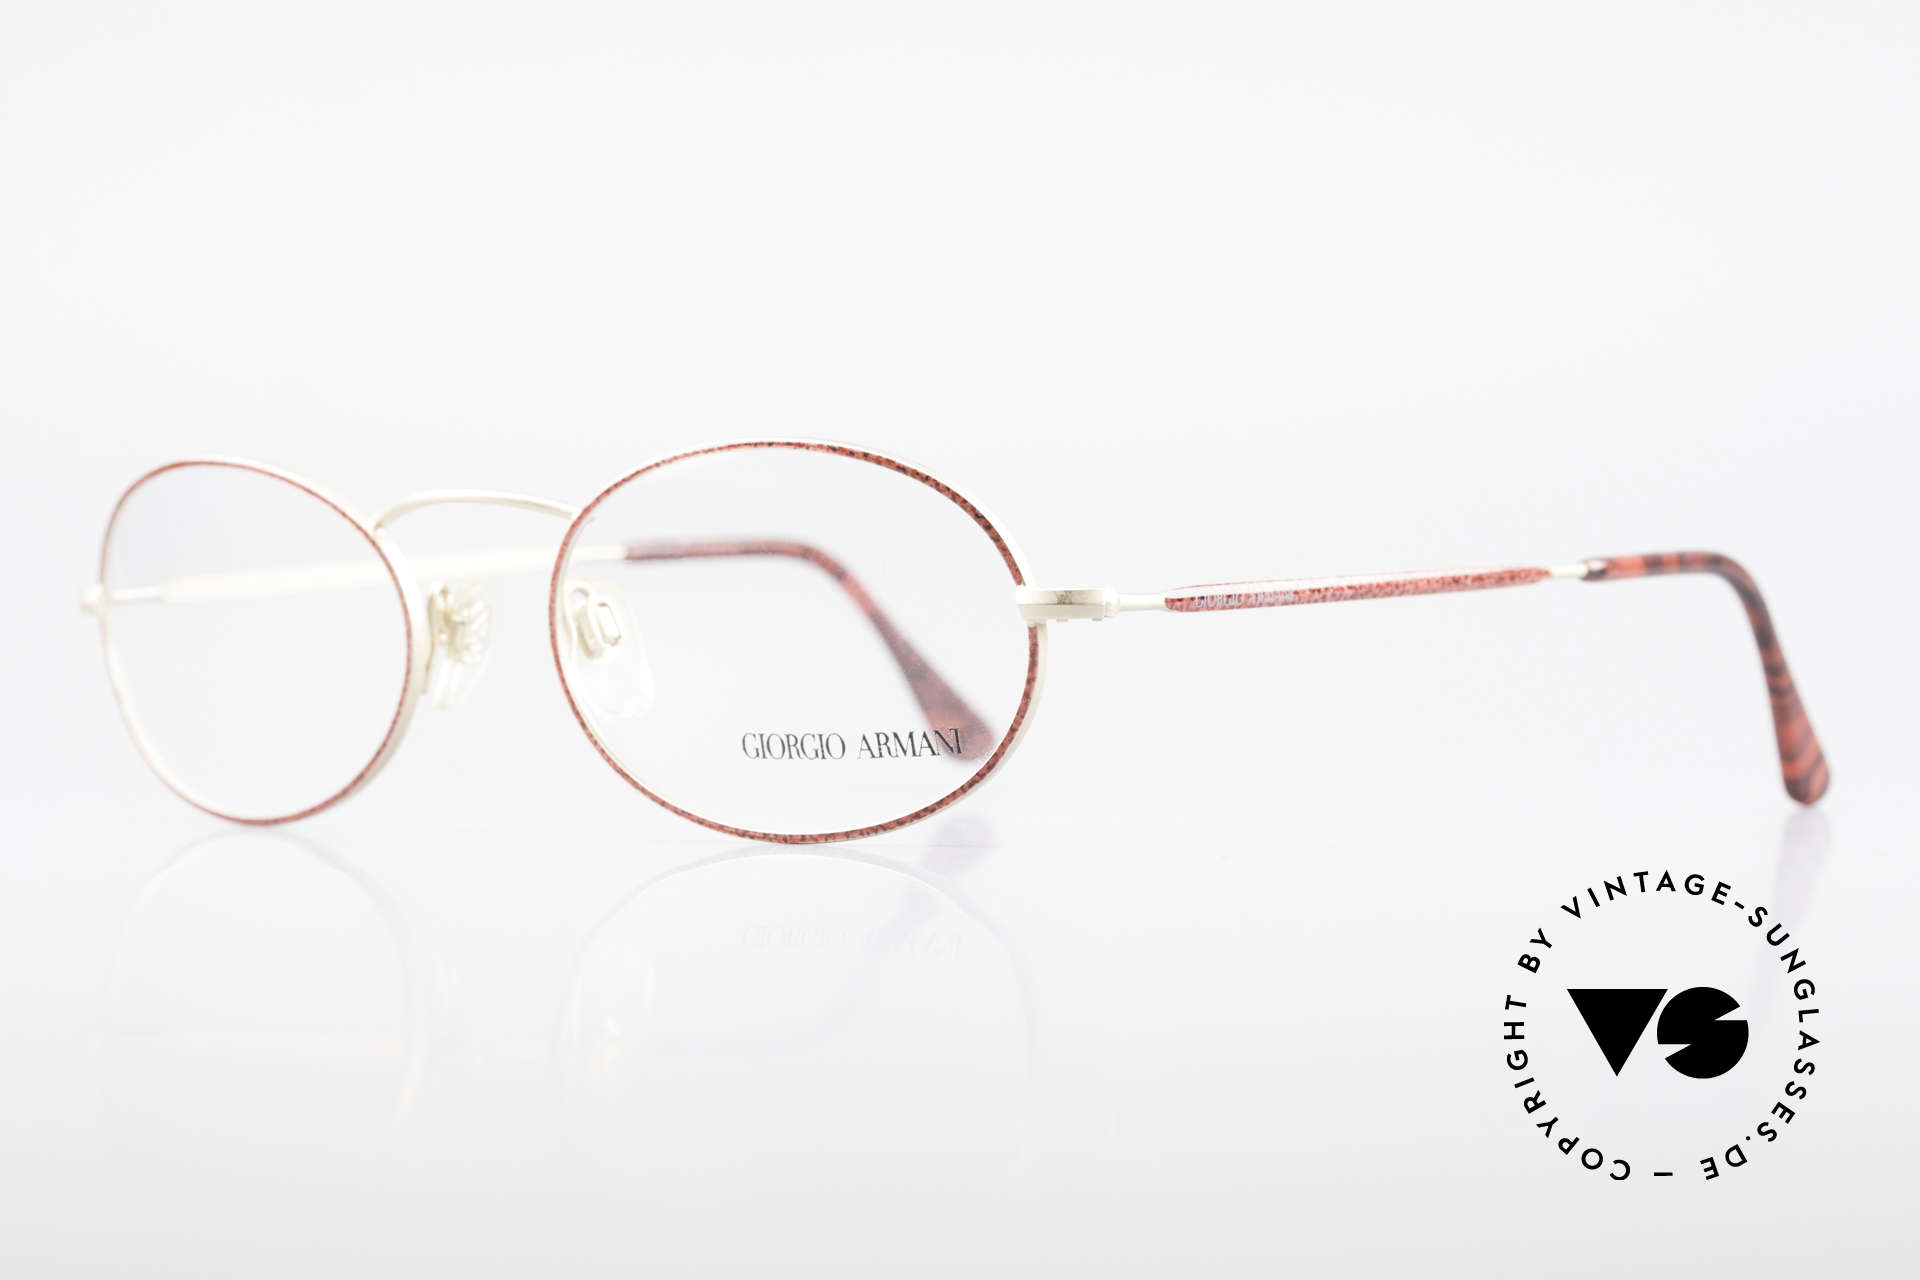 Giorgio Armani 125 Oval 80's Vintage Glasses, sober, timeless style: suitable for many occasions, Made for Women